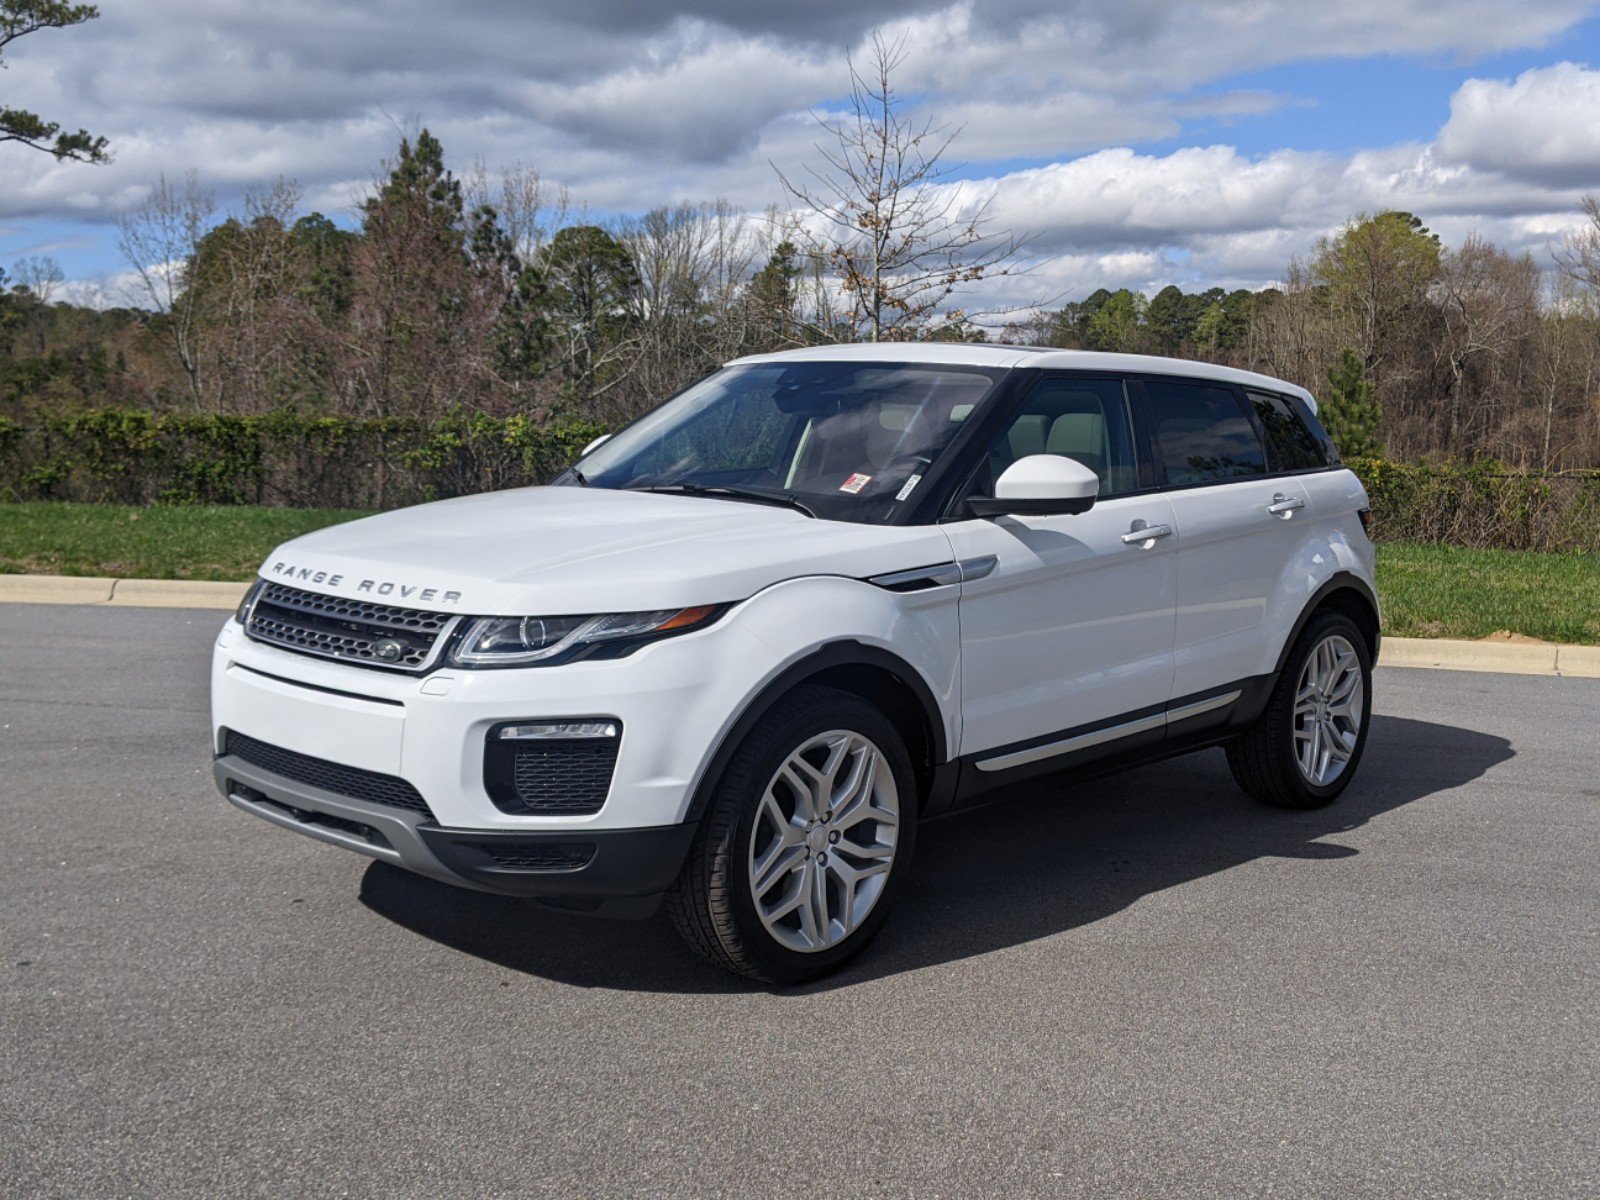 Certified Pre-Owned 2019 Land Rover Range Rover Evoque HSE Sport Utility in  Cary #NX55307 | Land Rover Cary